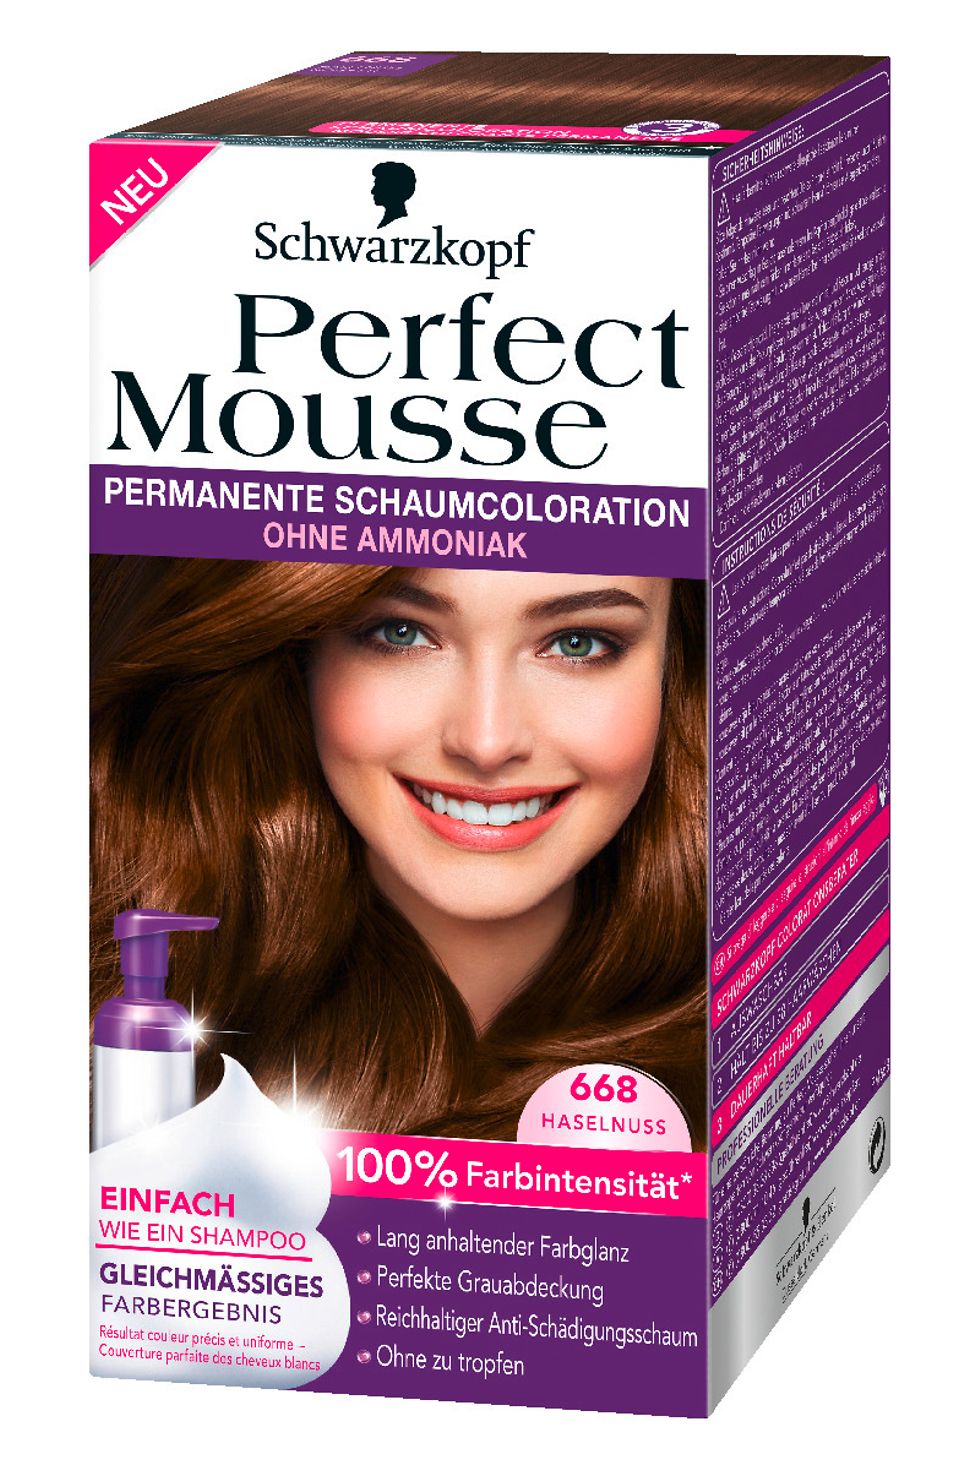 Perfect Mousse 668 Haselnuss